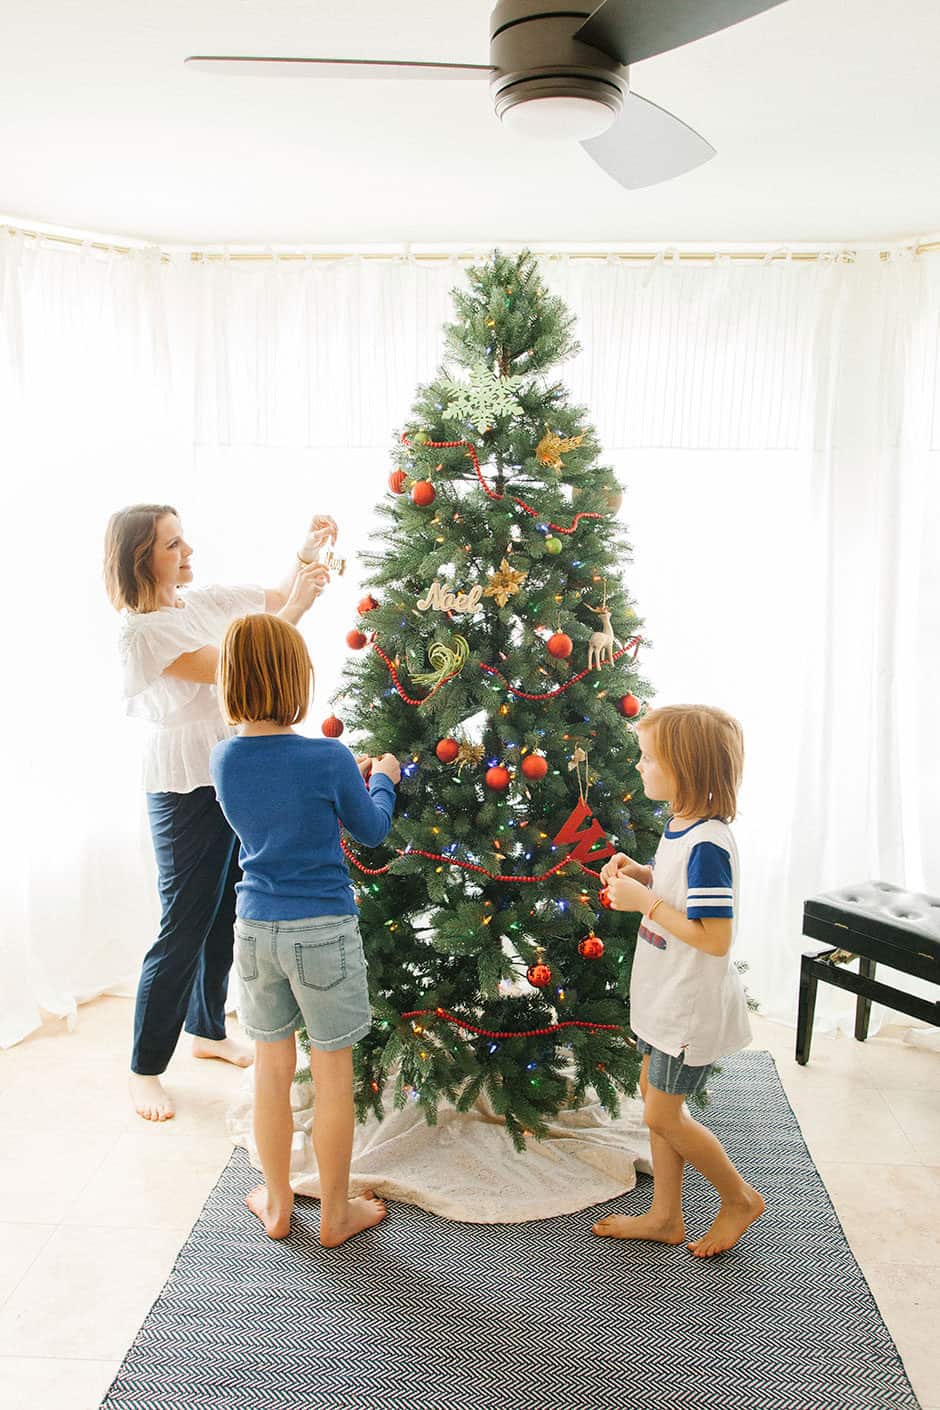 The holiday season is notoriously stressful and busy, but it doesn't have to be that way! Learn how to keep the magic alive and enjoy the season with your kids without having an anxiety attack. Read on for tips for a stress free Christmas! 